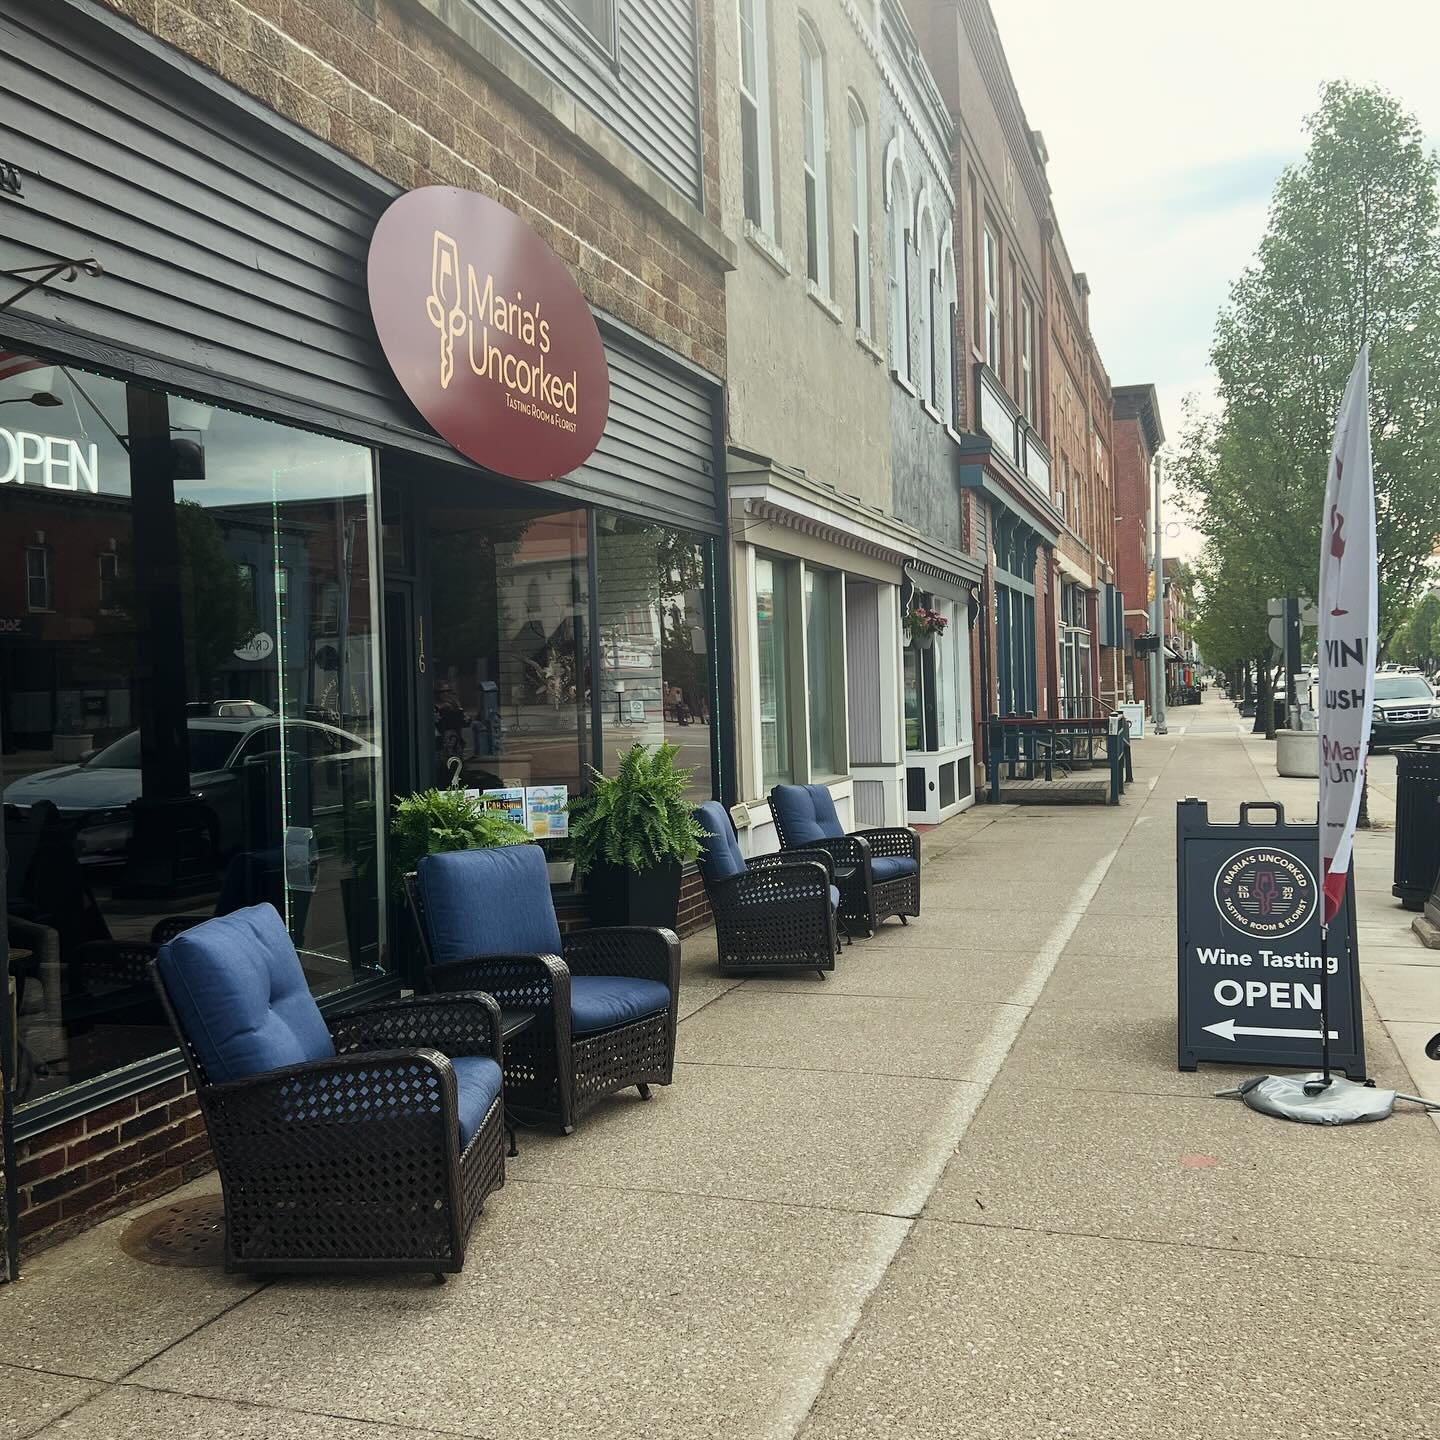 Consistent nice weather means outdoor seating! It&rsquo;s also the first day of the @marshallfarmsmarket and what a BEAUTIFUL day for it! #sunnydays #choosemarshall #supportsmallbusiness #mariasuncorked #mariasuncorkedwines